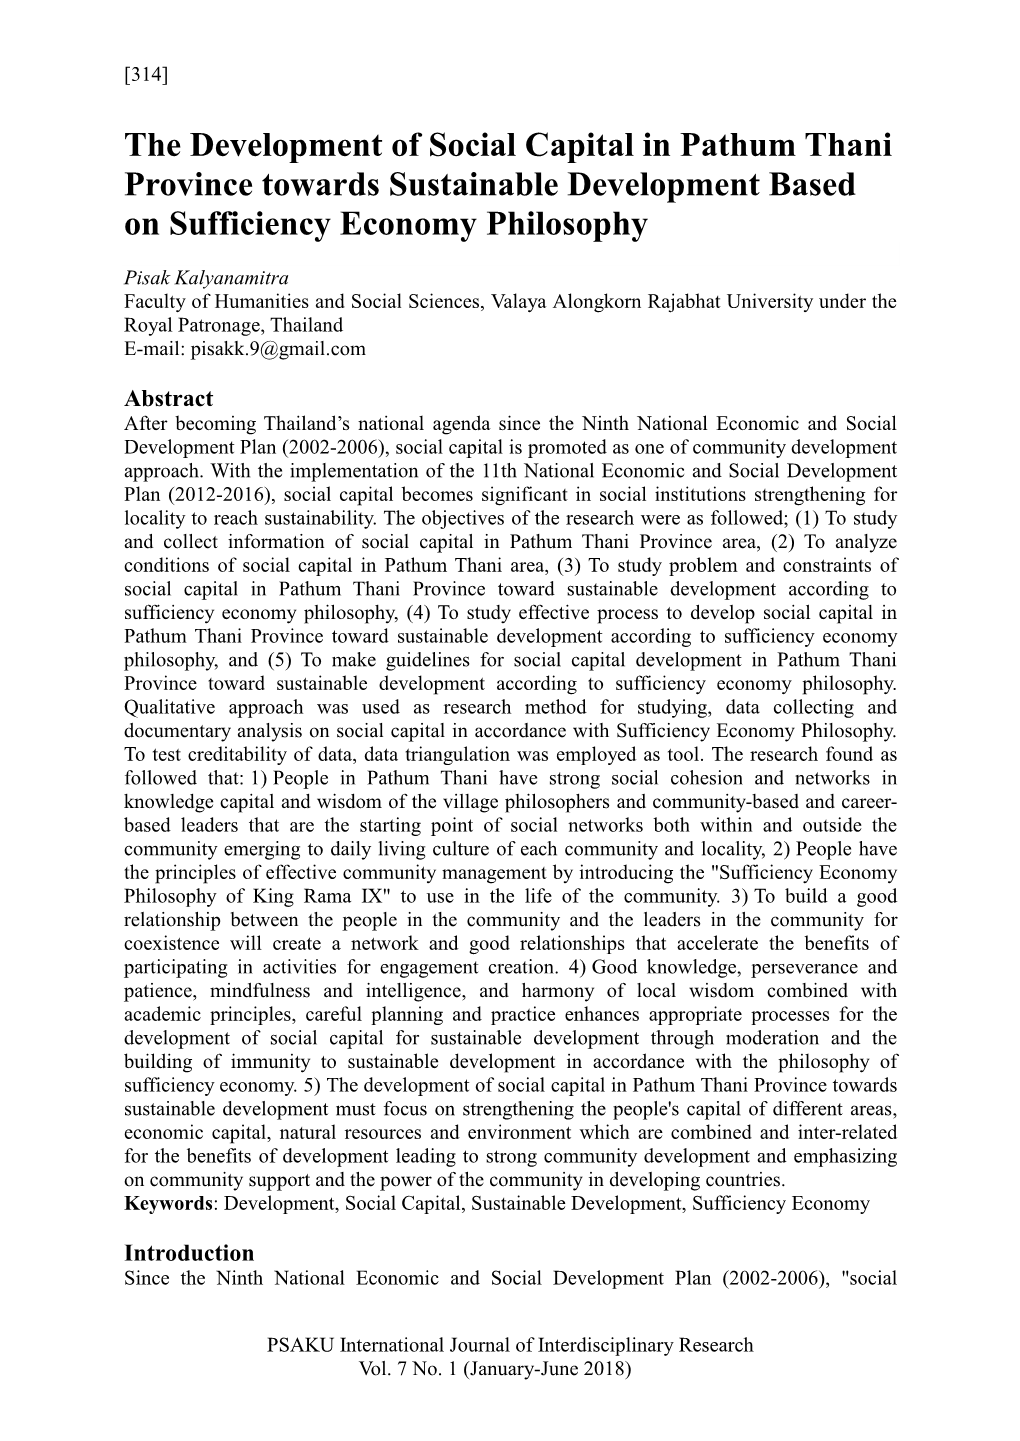 The Development of Social Capital in Pathum Thani Province Towards Sustainable Development Based on Sufficiency Economy Philosophy